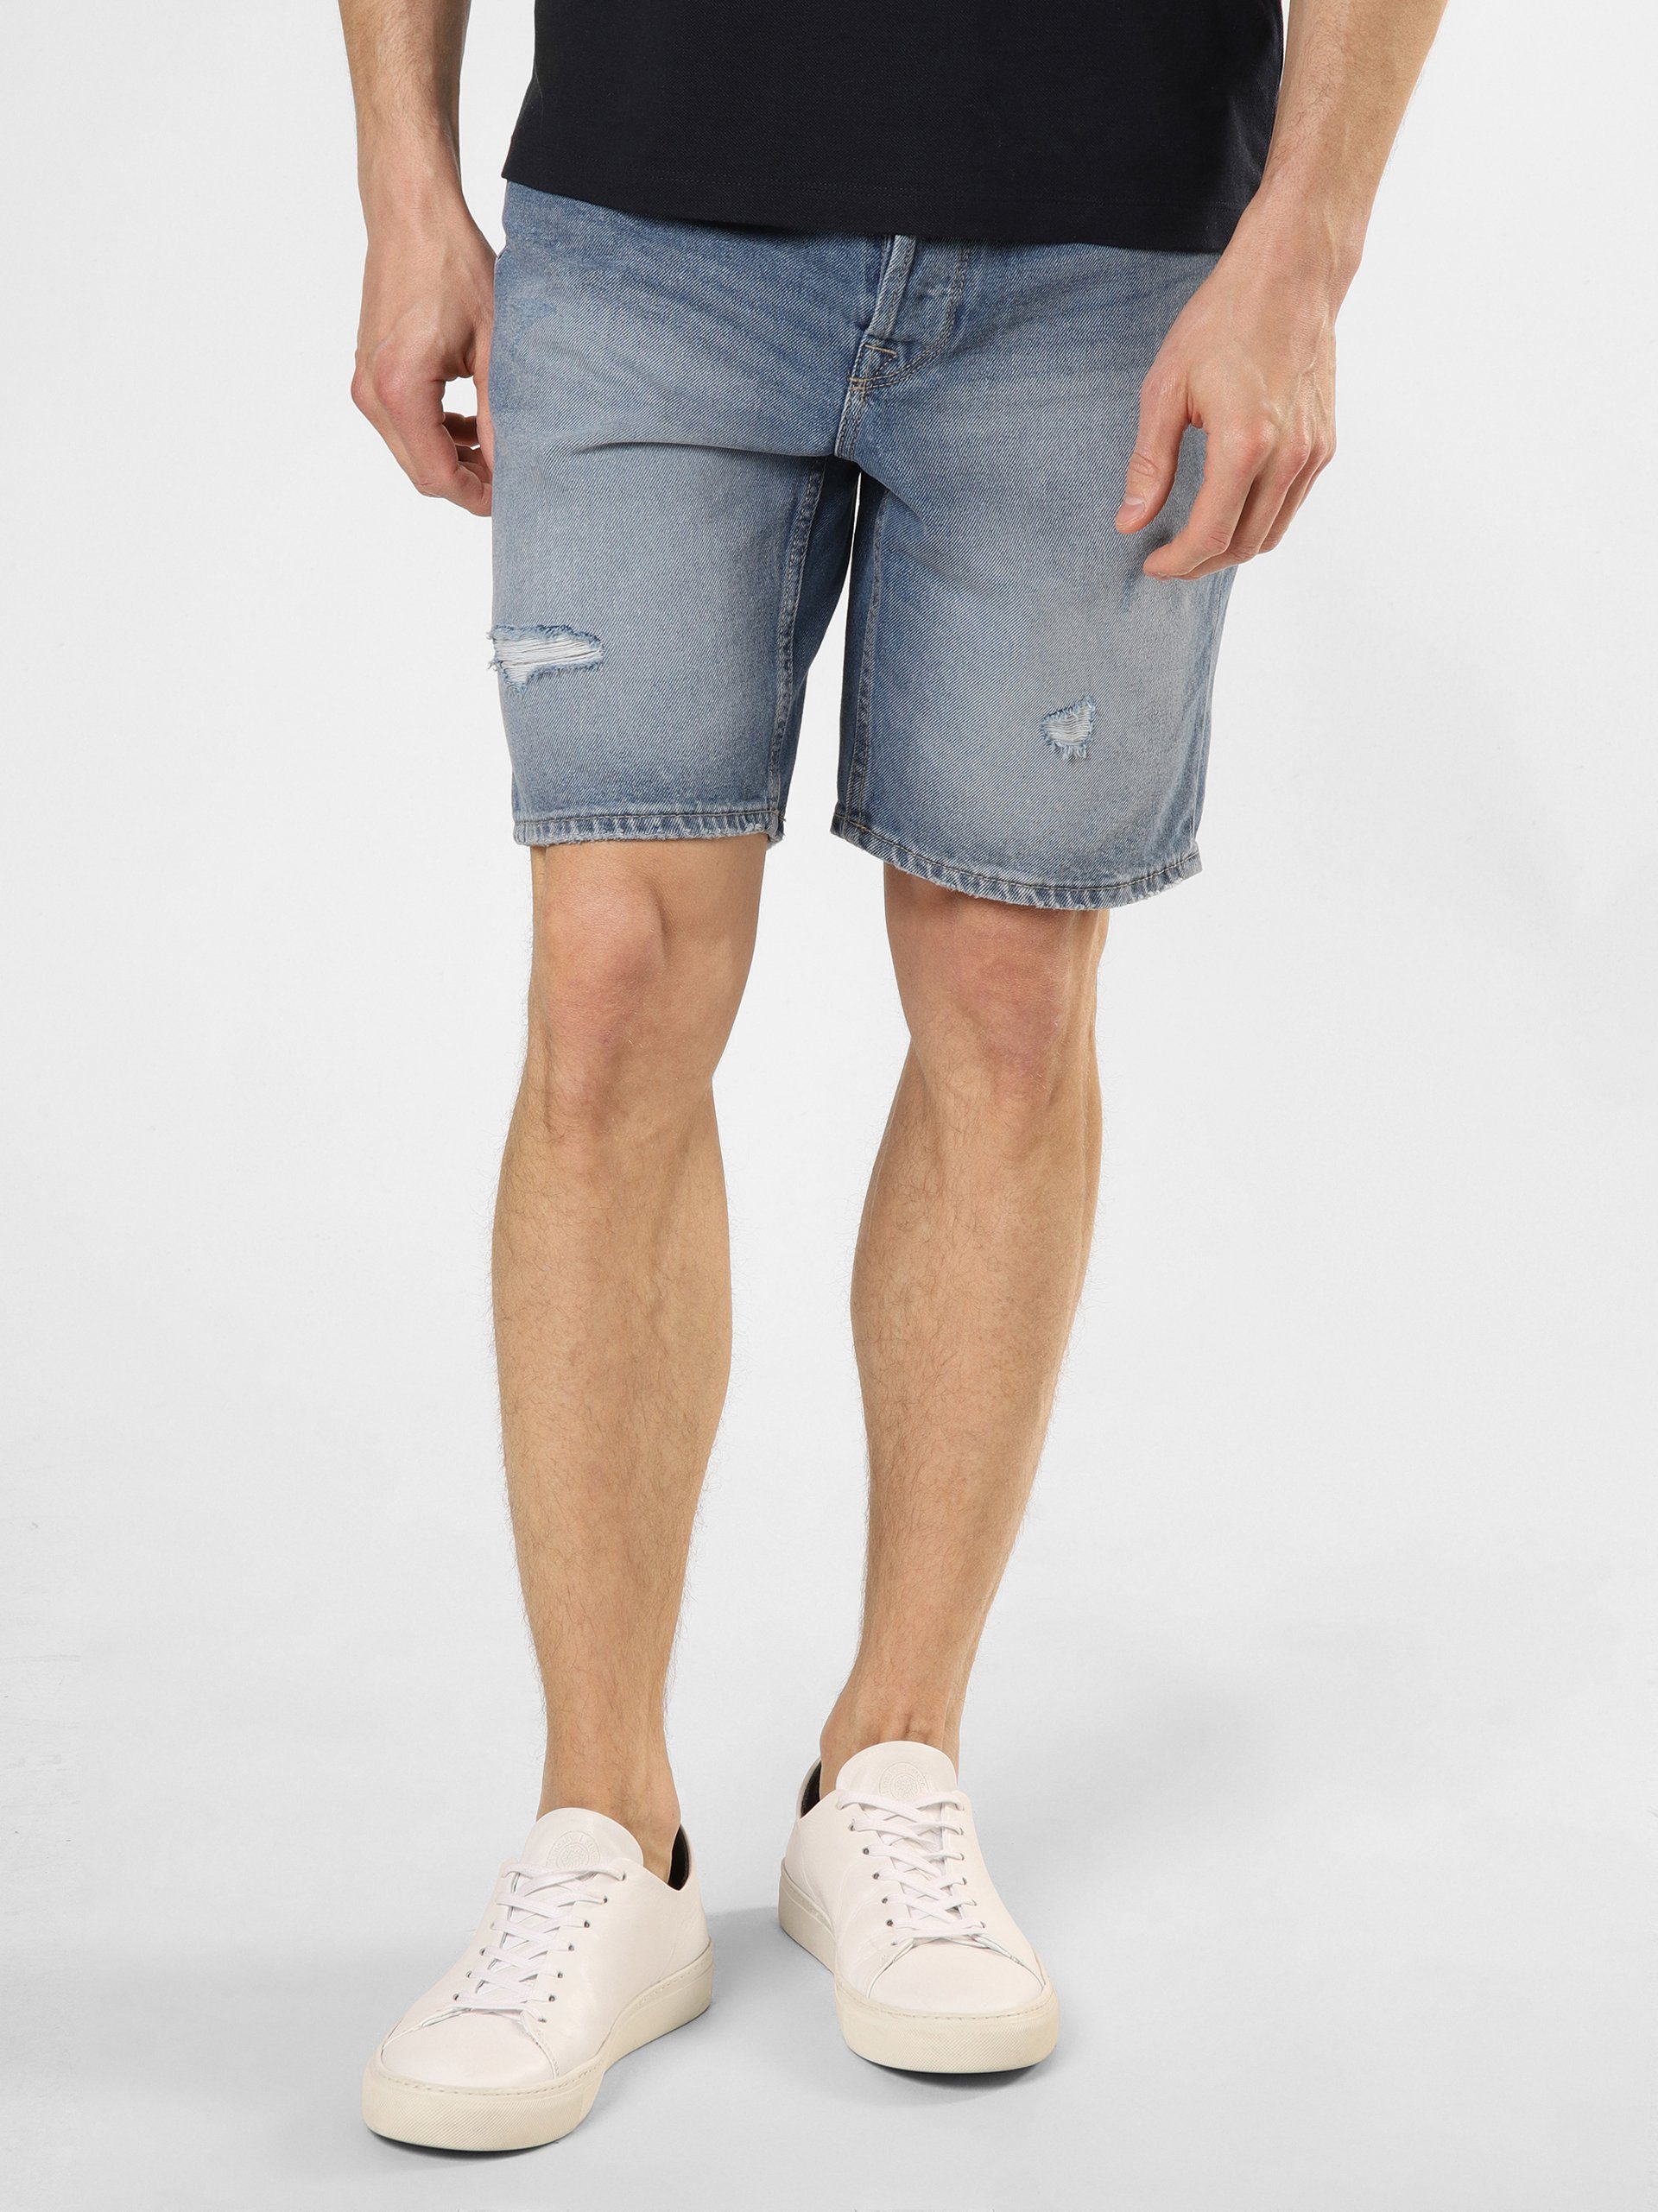 SONS ONSEdge & ONLY Shorts